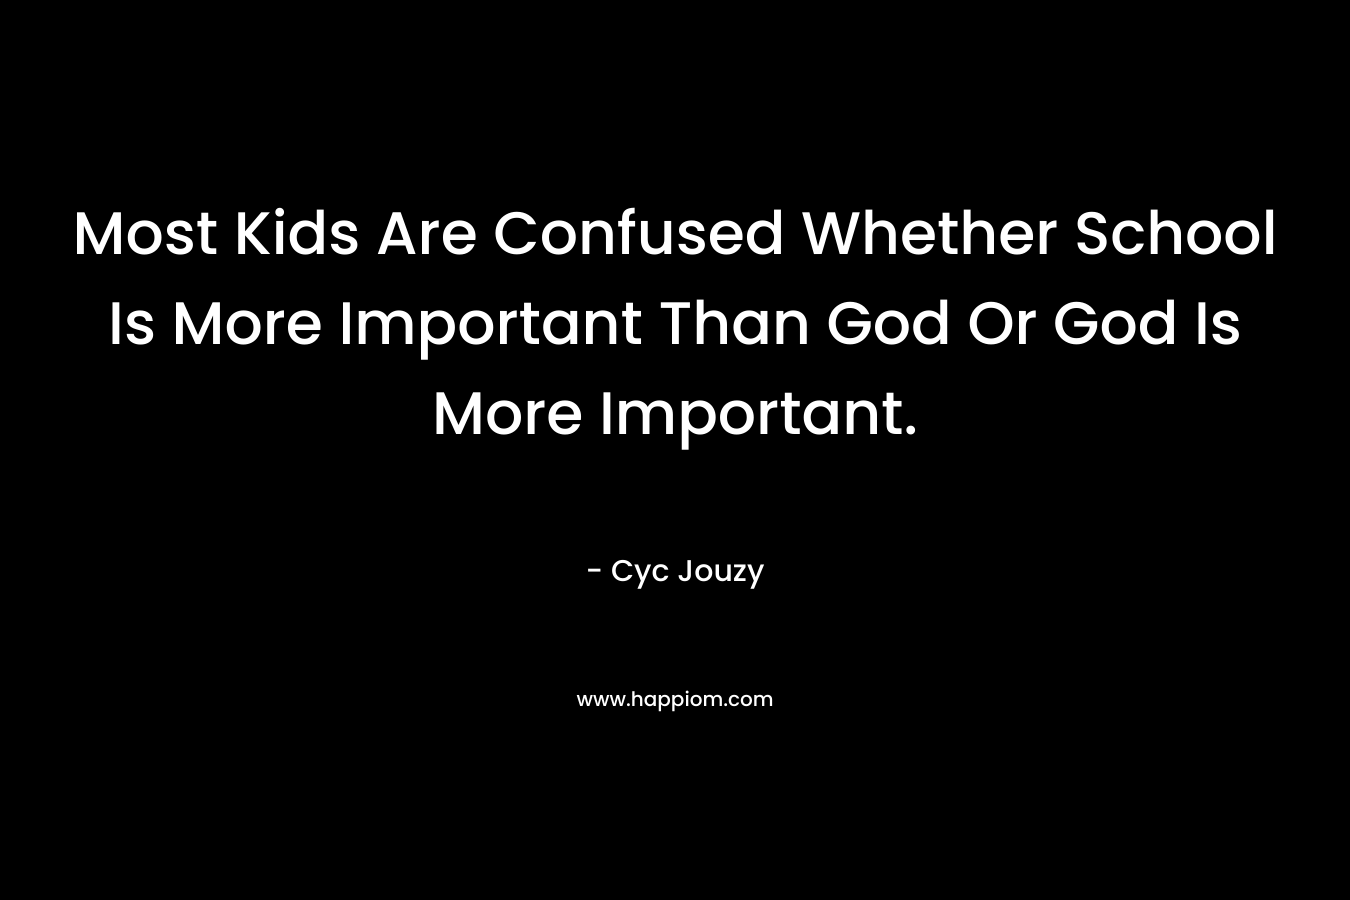 Most Kids Are Confused Whether School Is More Important Than God Or God Is More Important.